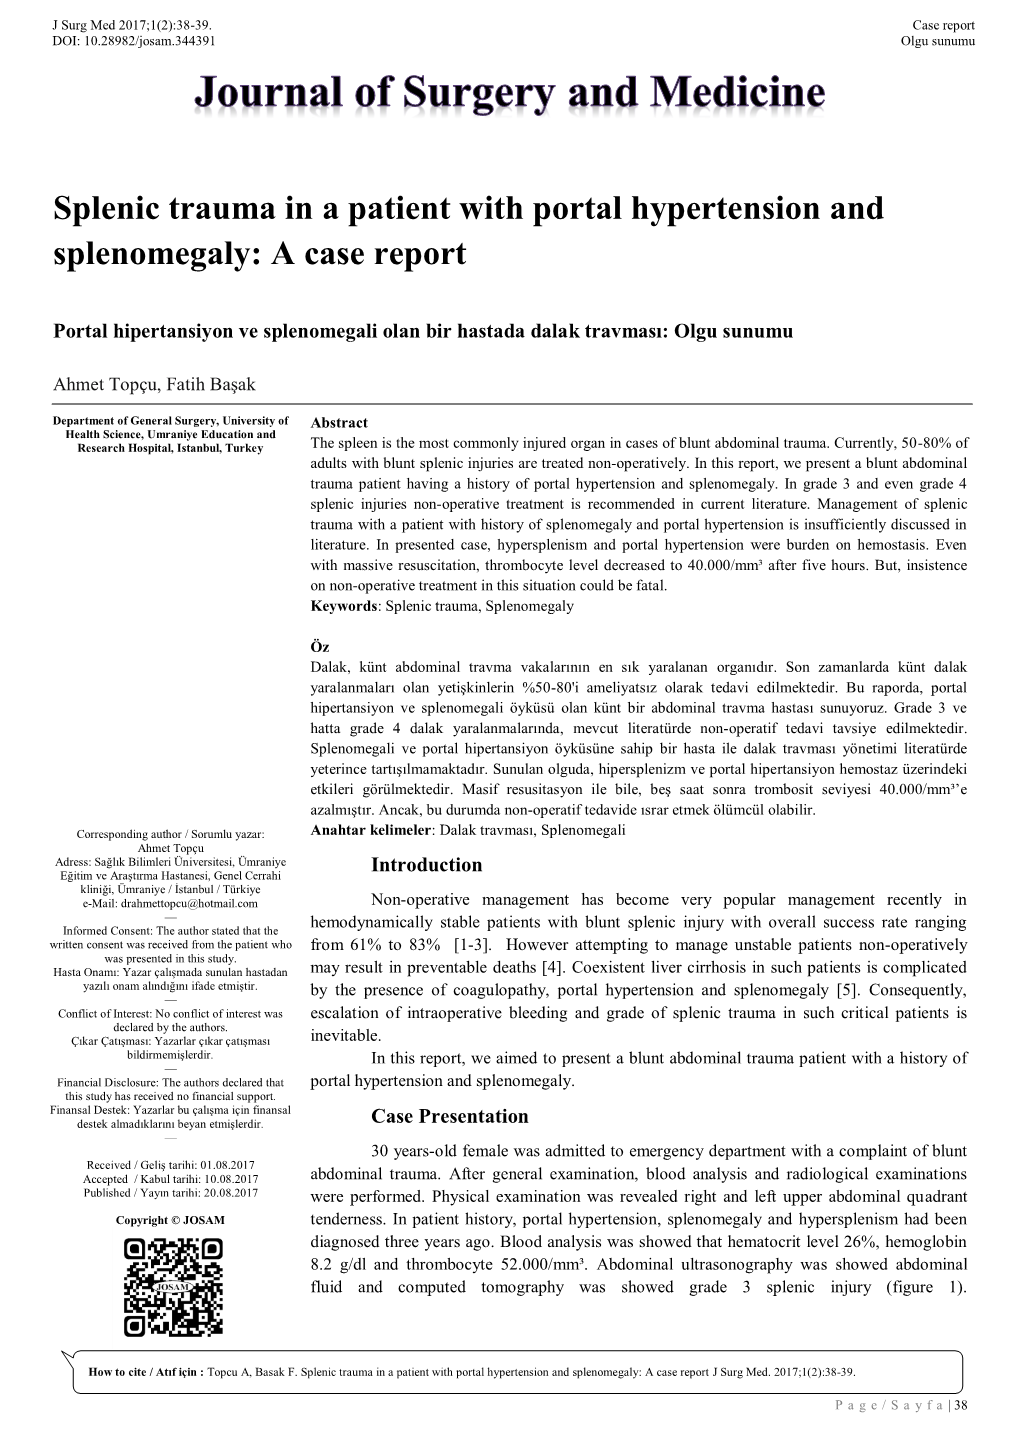 Splenic Trauma in a Patient with Portal Hypertension and Splenomegaly: a Case Report